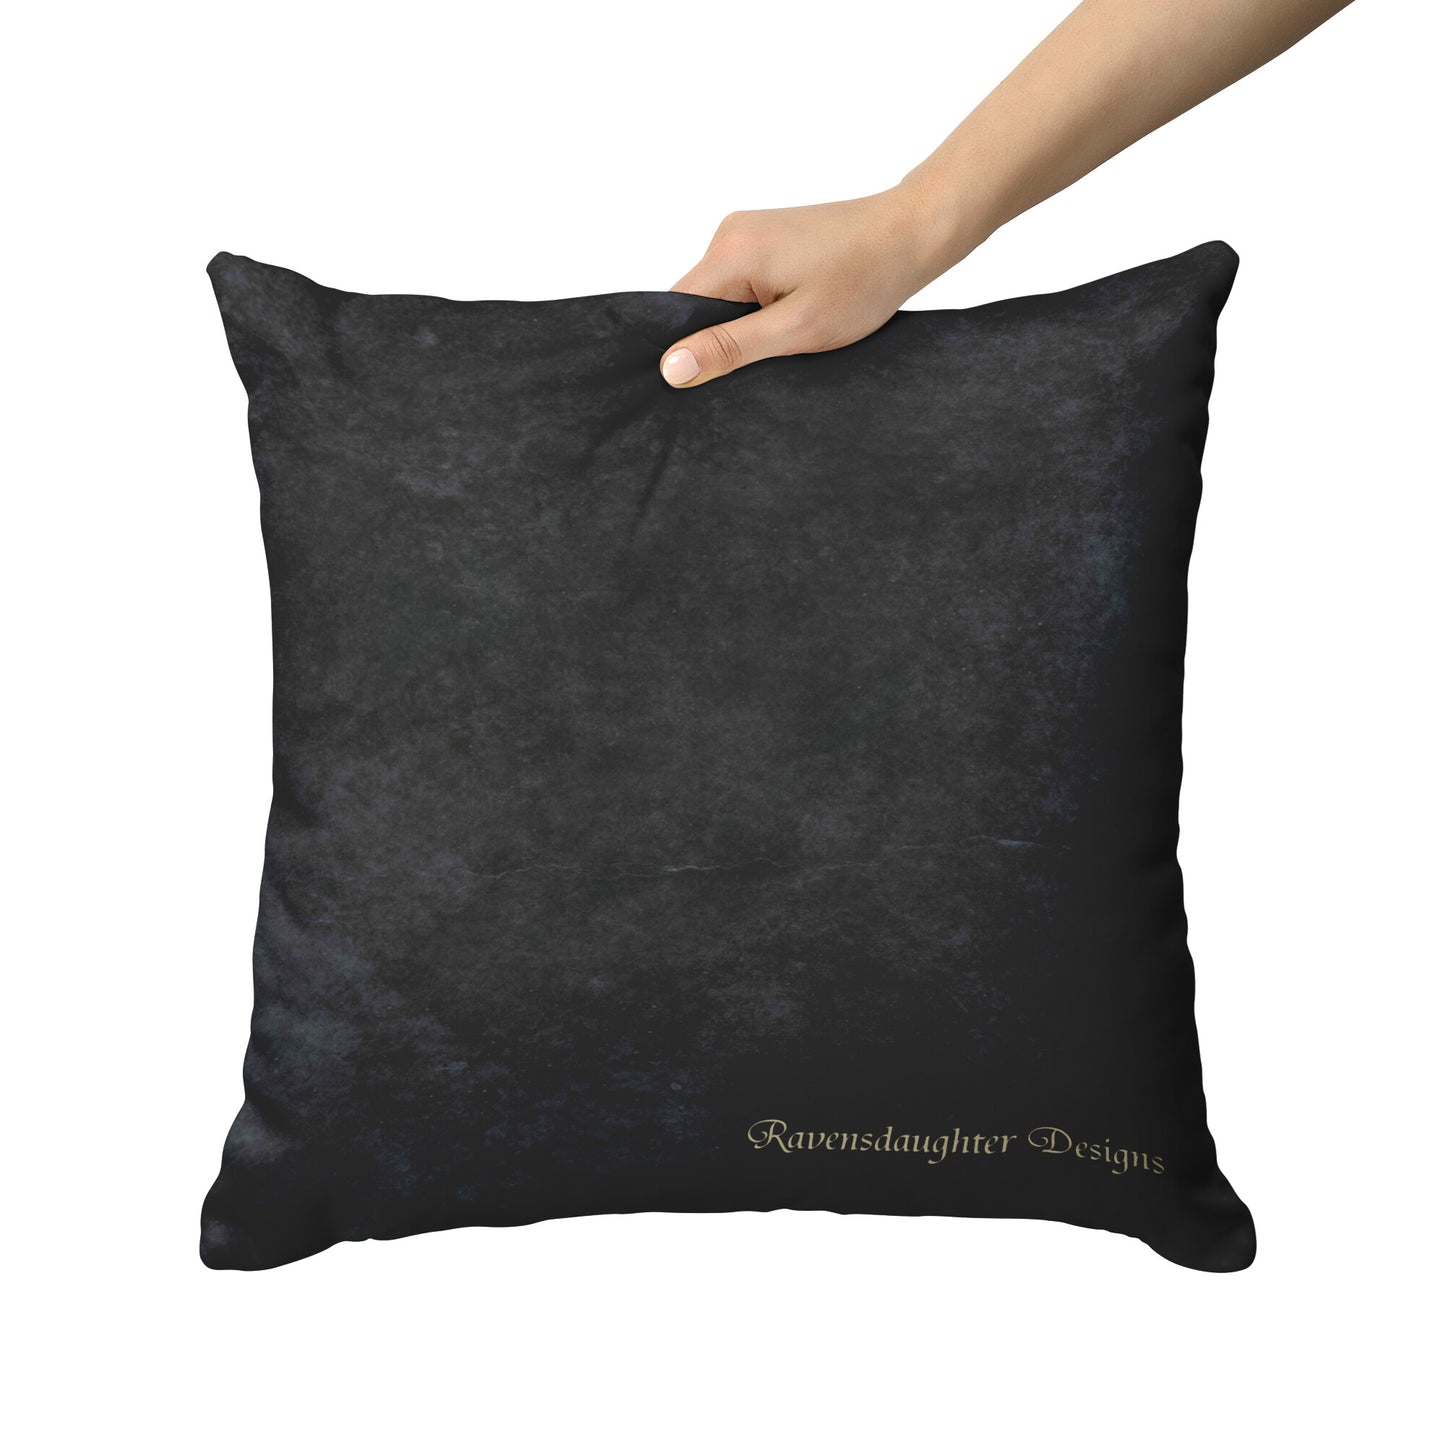 7-Circuit Seed Finger Labyrinth 2-Sided Throw Pillow